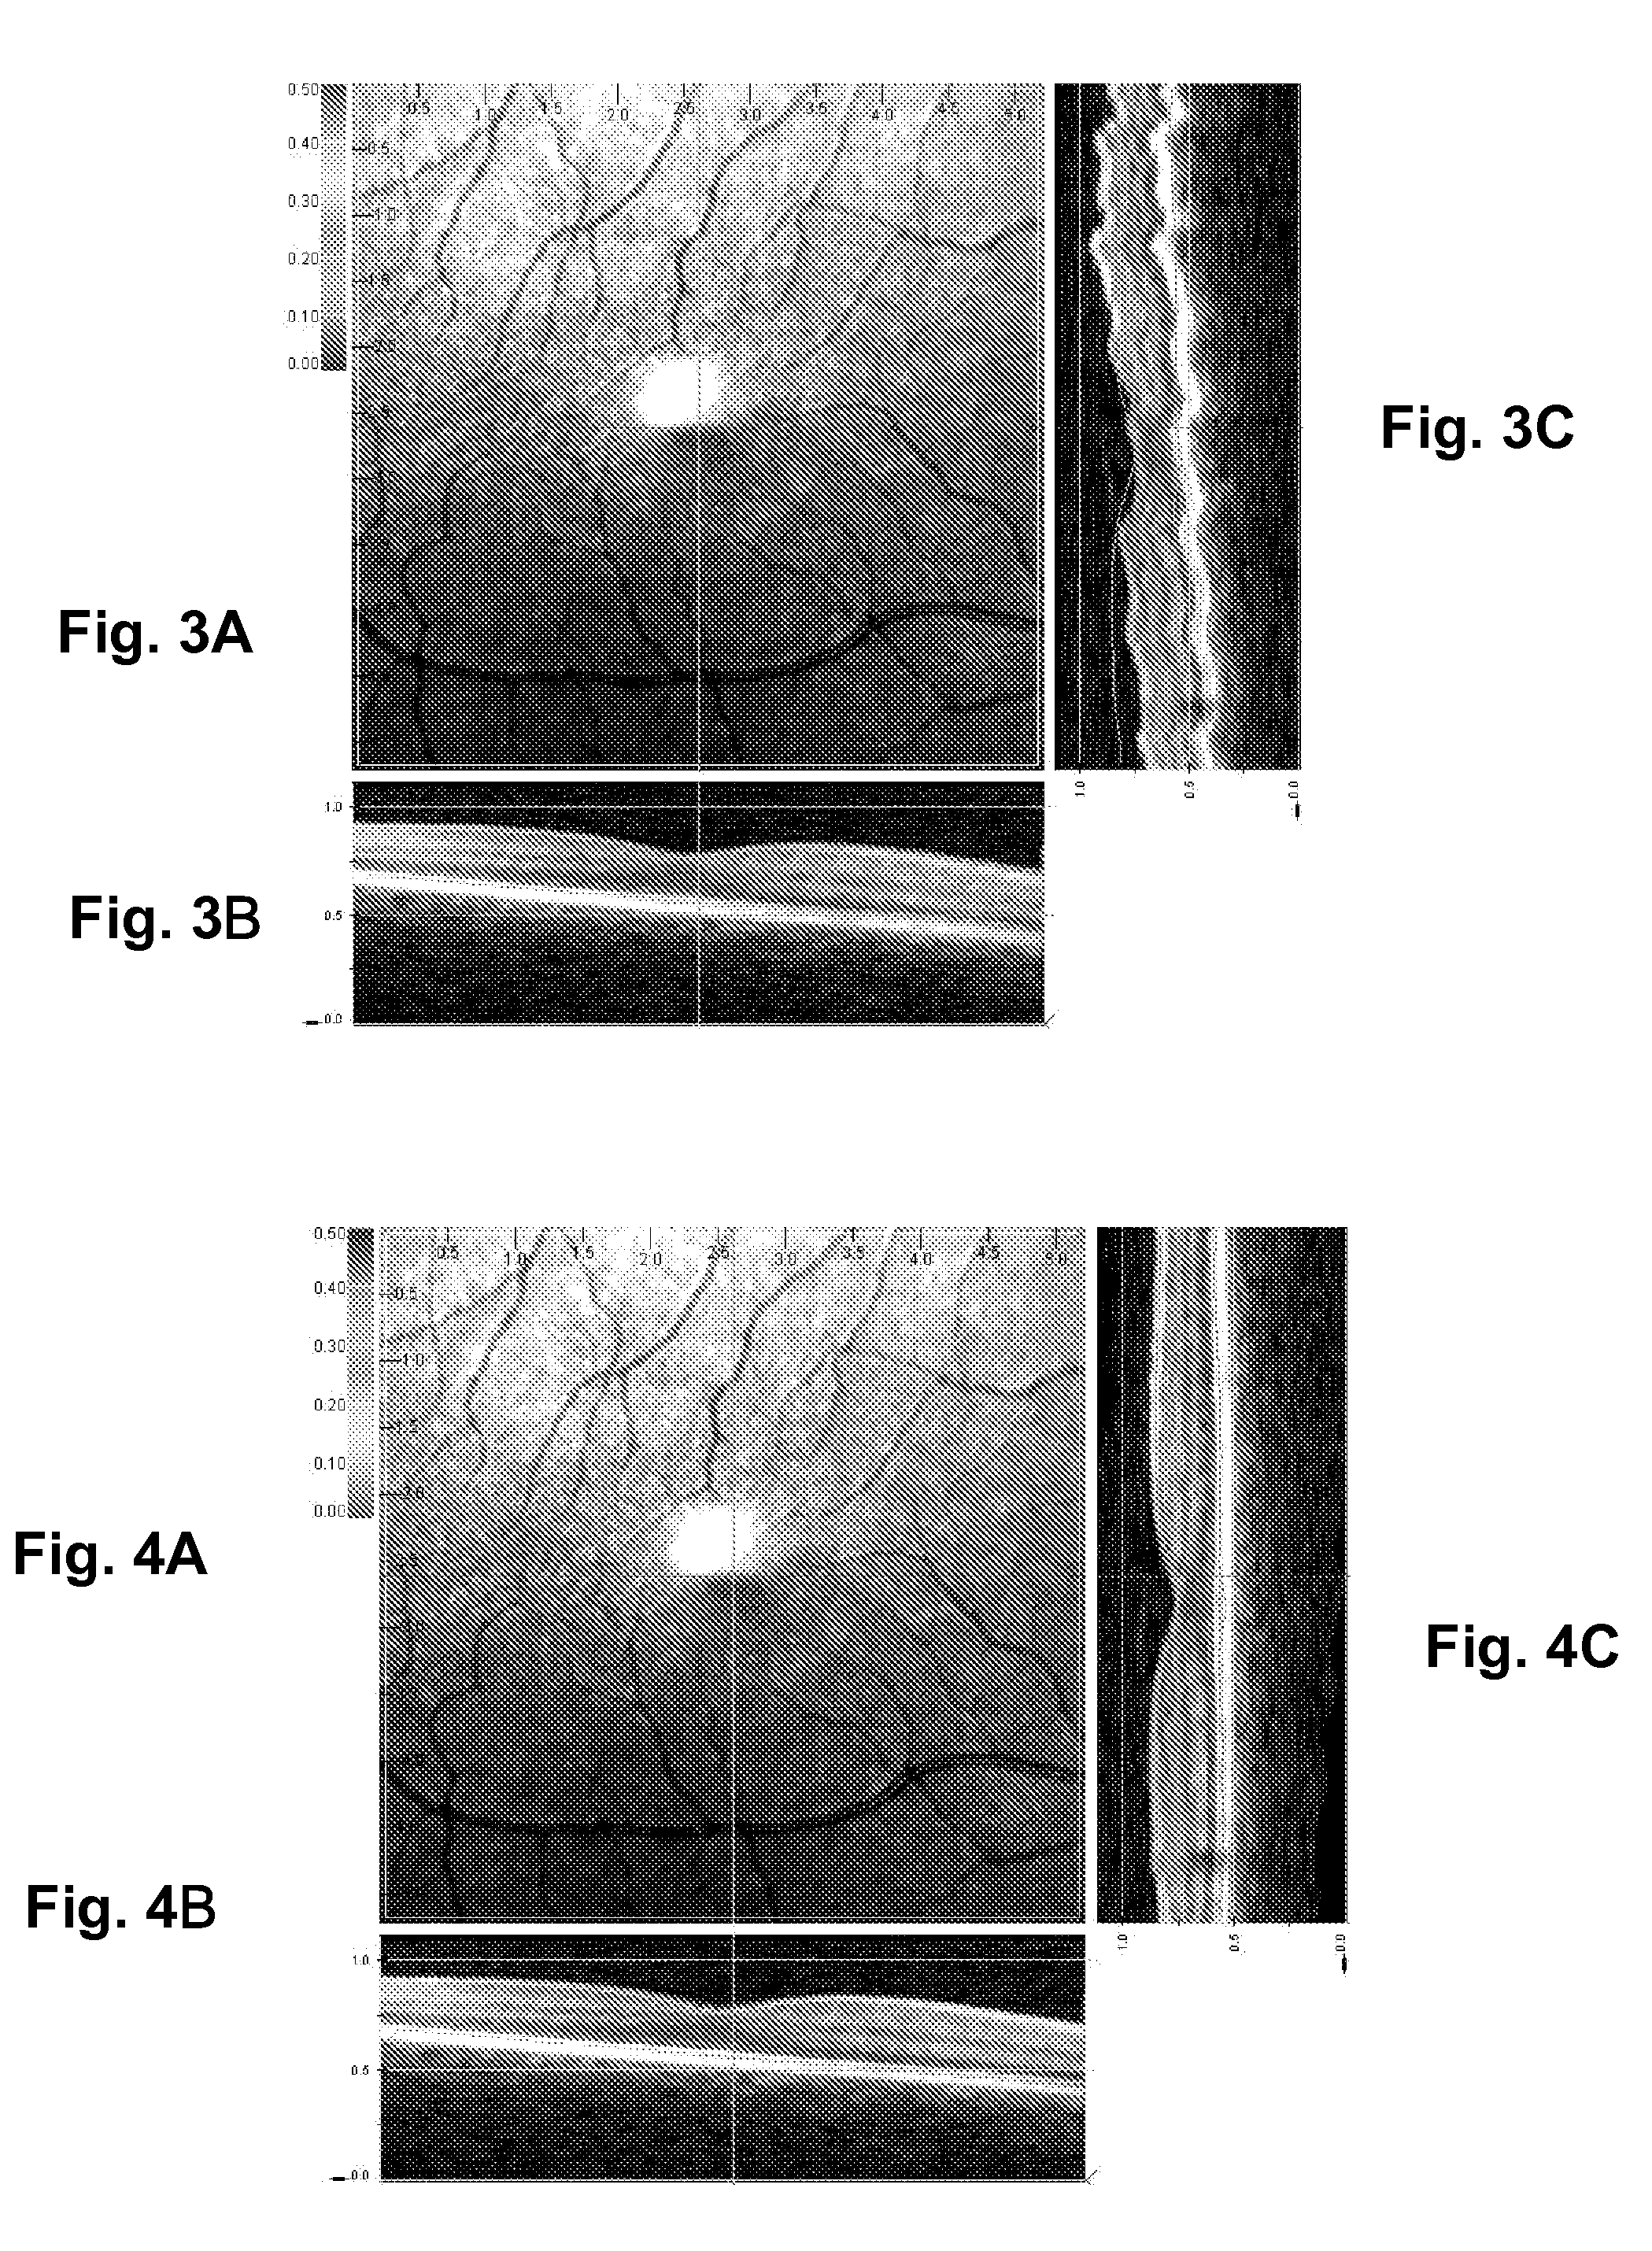 Method for correcting patient motion when obtaining retina volume using optical coherence tomography